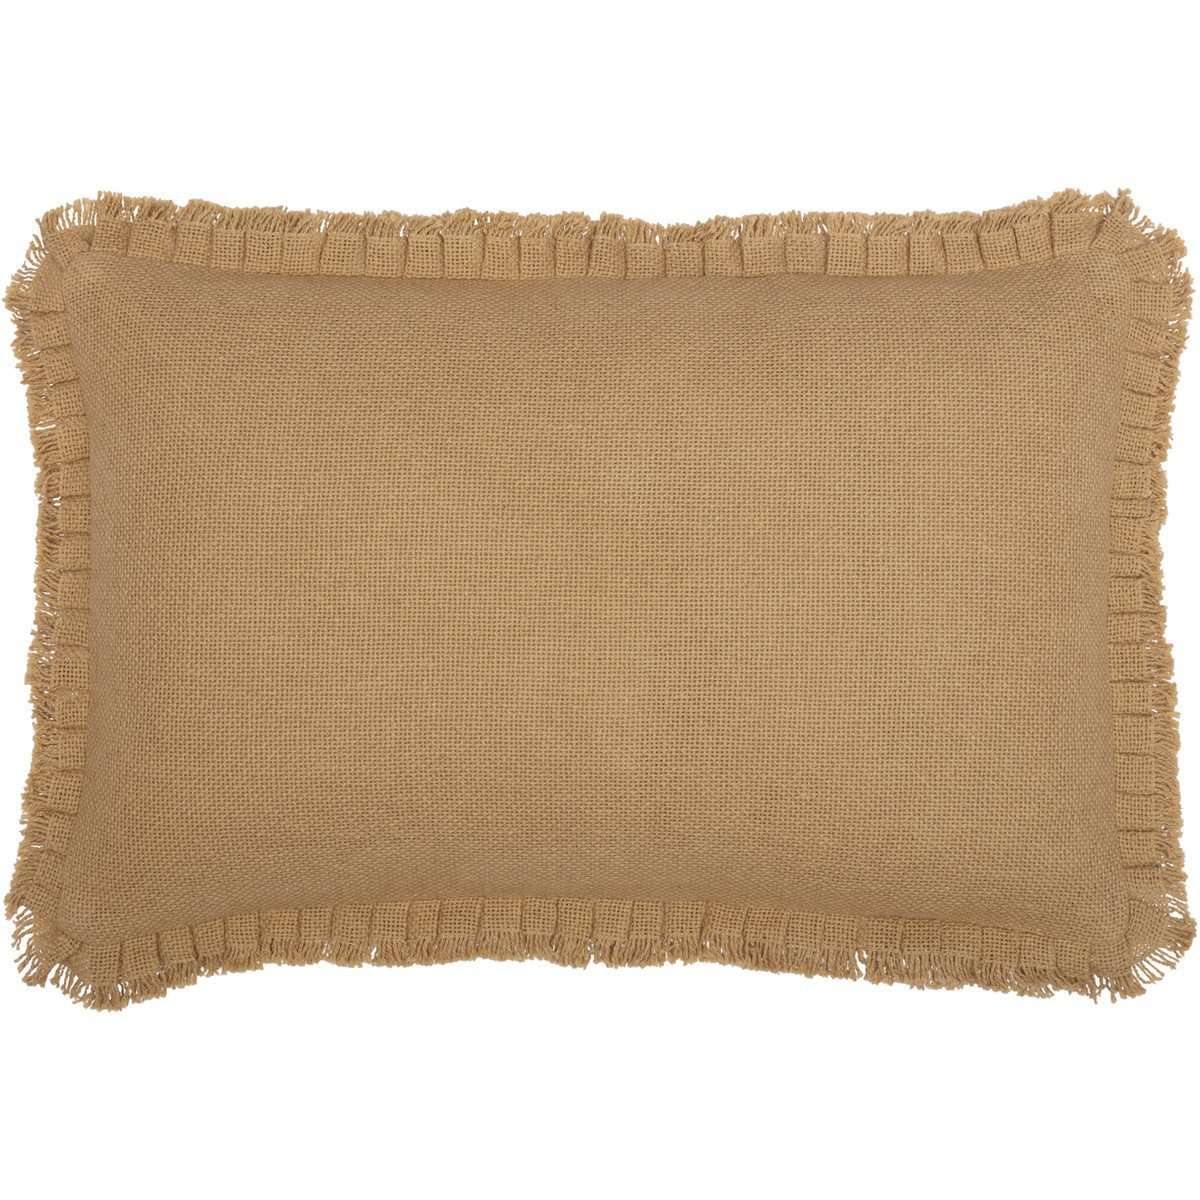 Burlap Natural Pillow w/ Fringed Ruffle 14x22 VHC Brands front